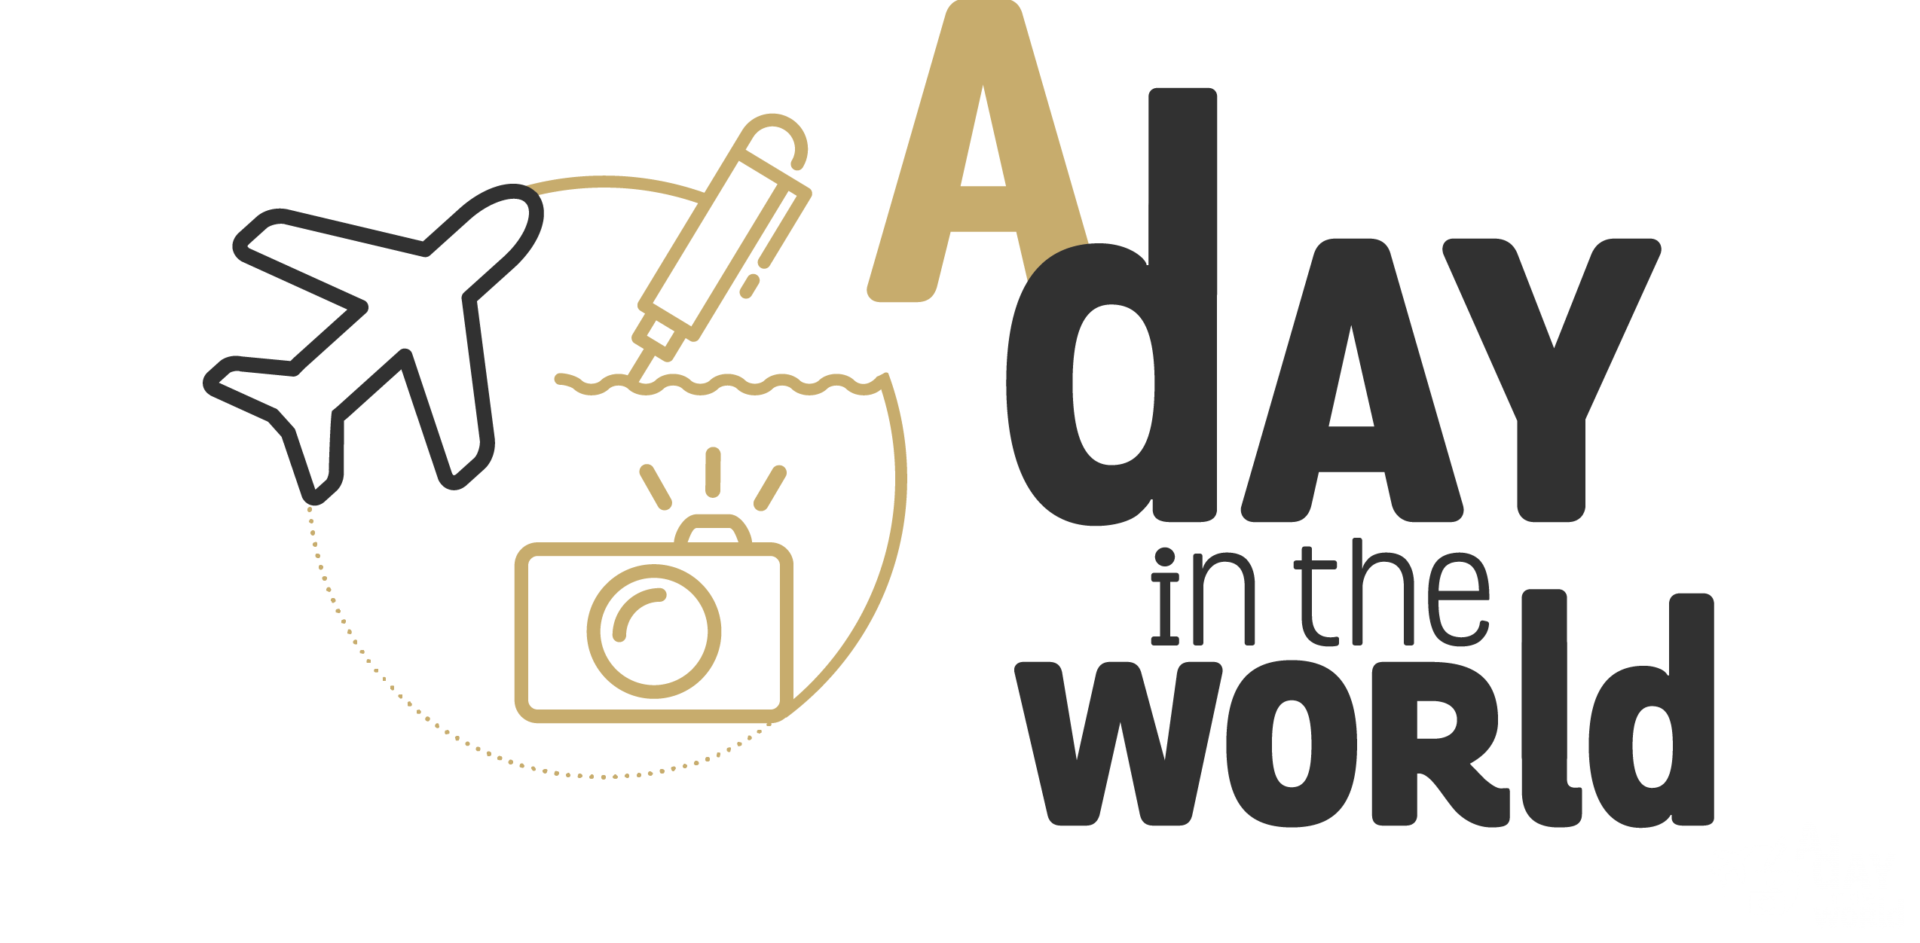 A day in the world - Blog voyage